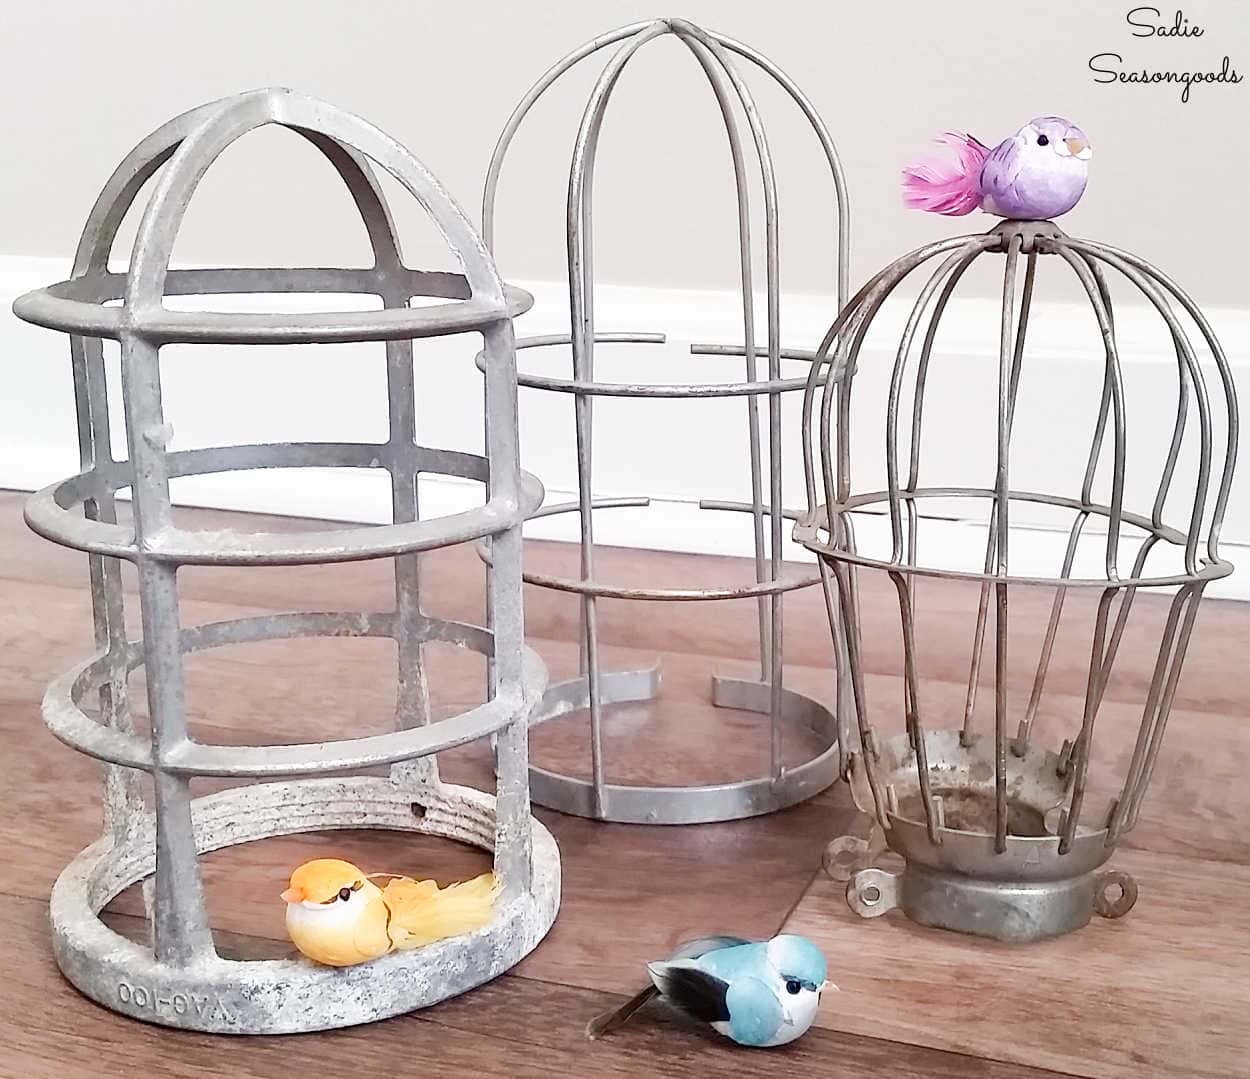 making a diy birdcage from cage light covers